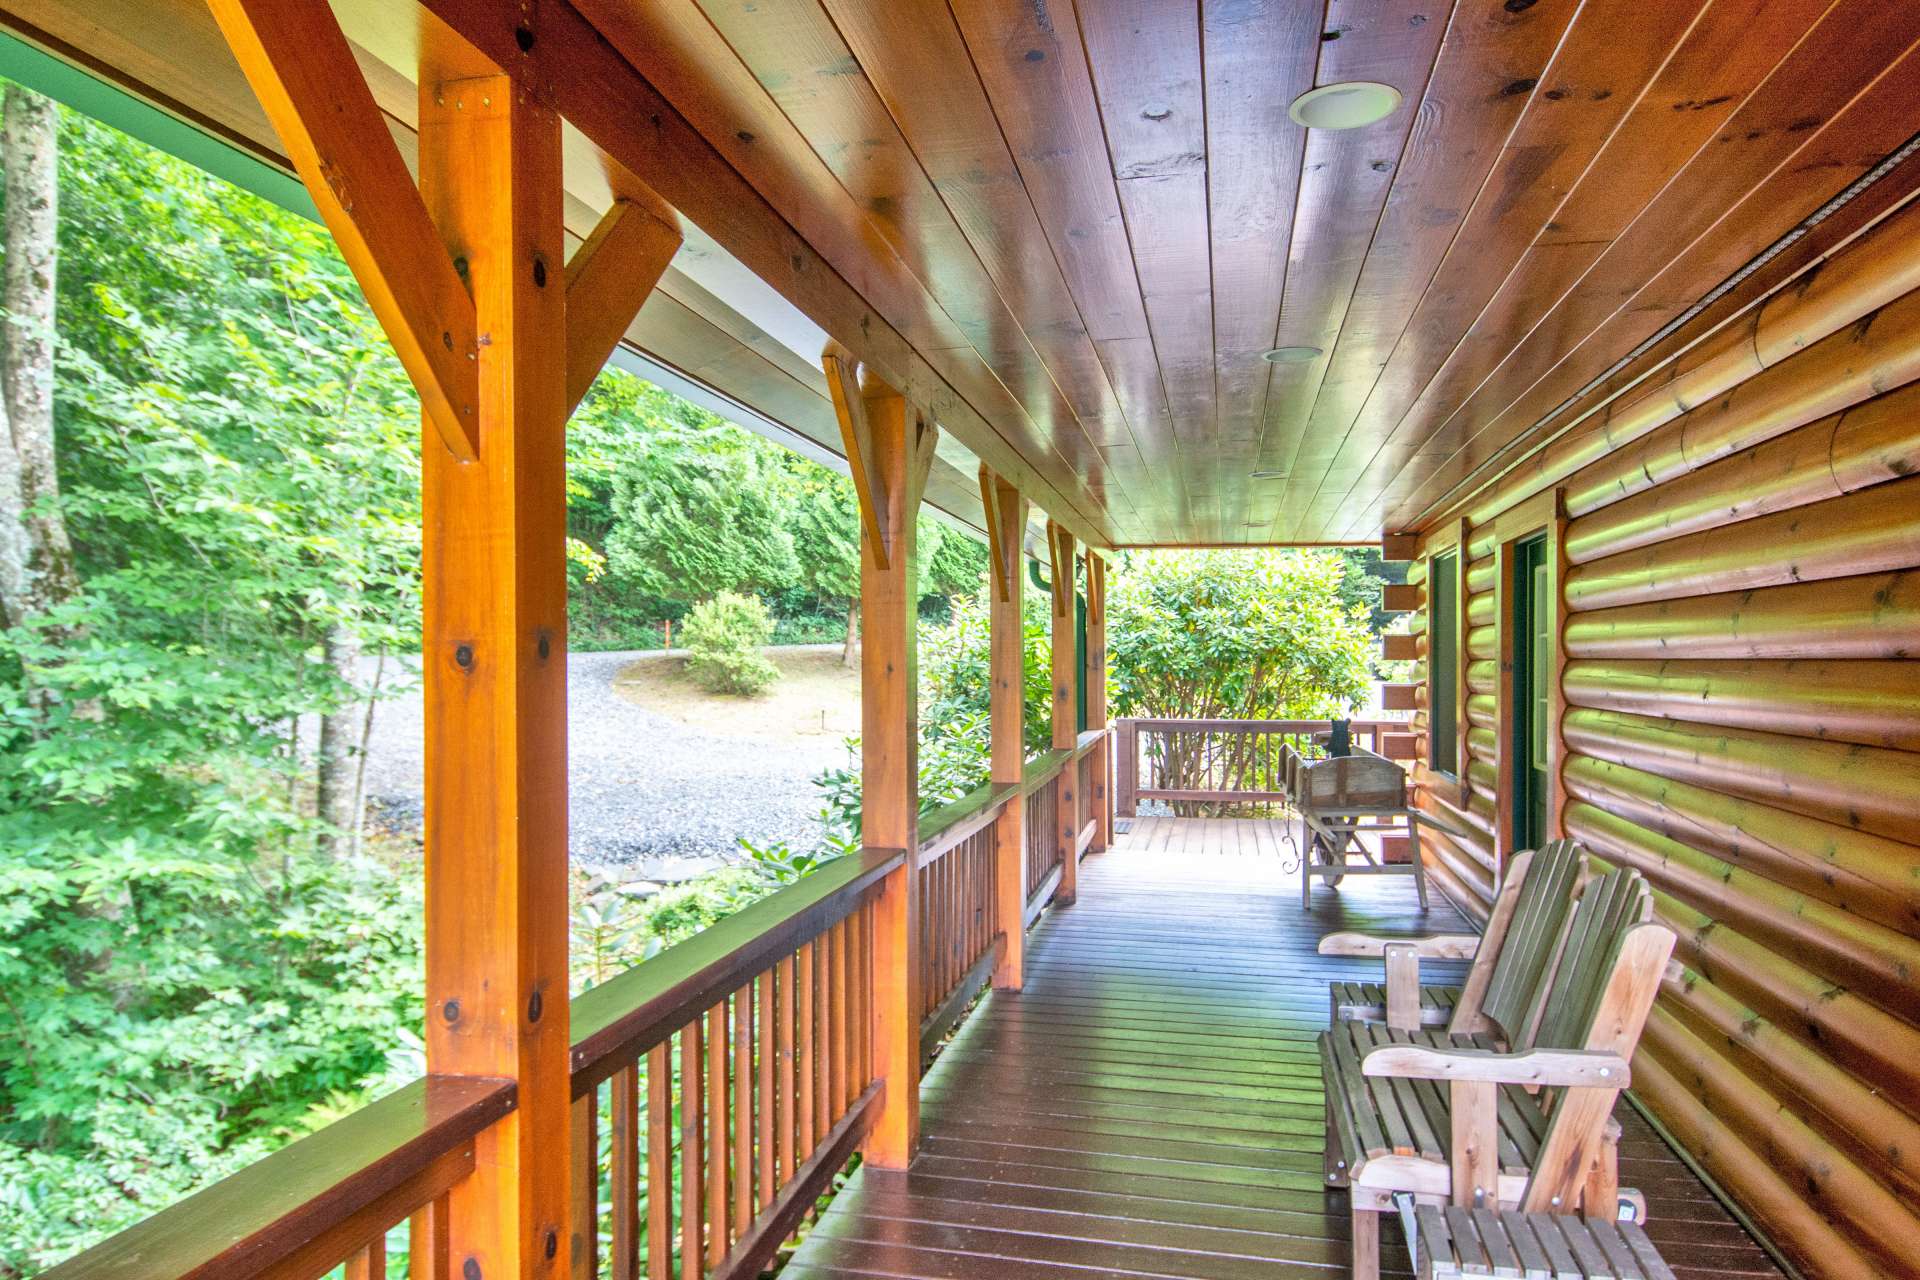 Relax on either of the covered porches and enjoy the fresh mountain air and the sounds of the mountain brook flowing below.